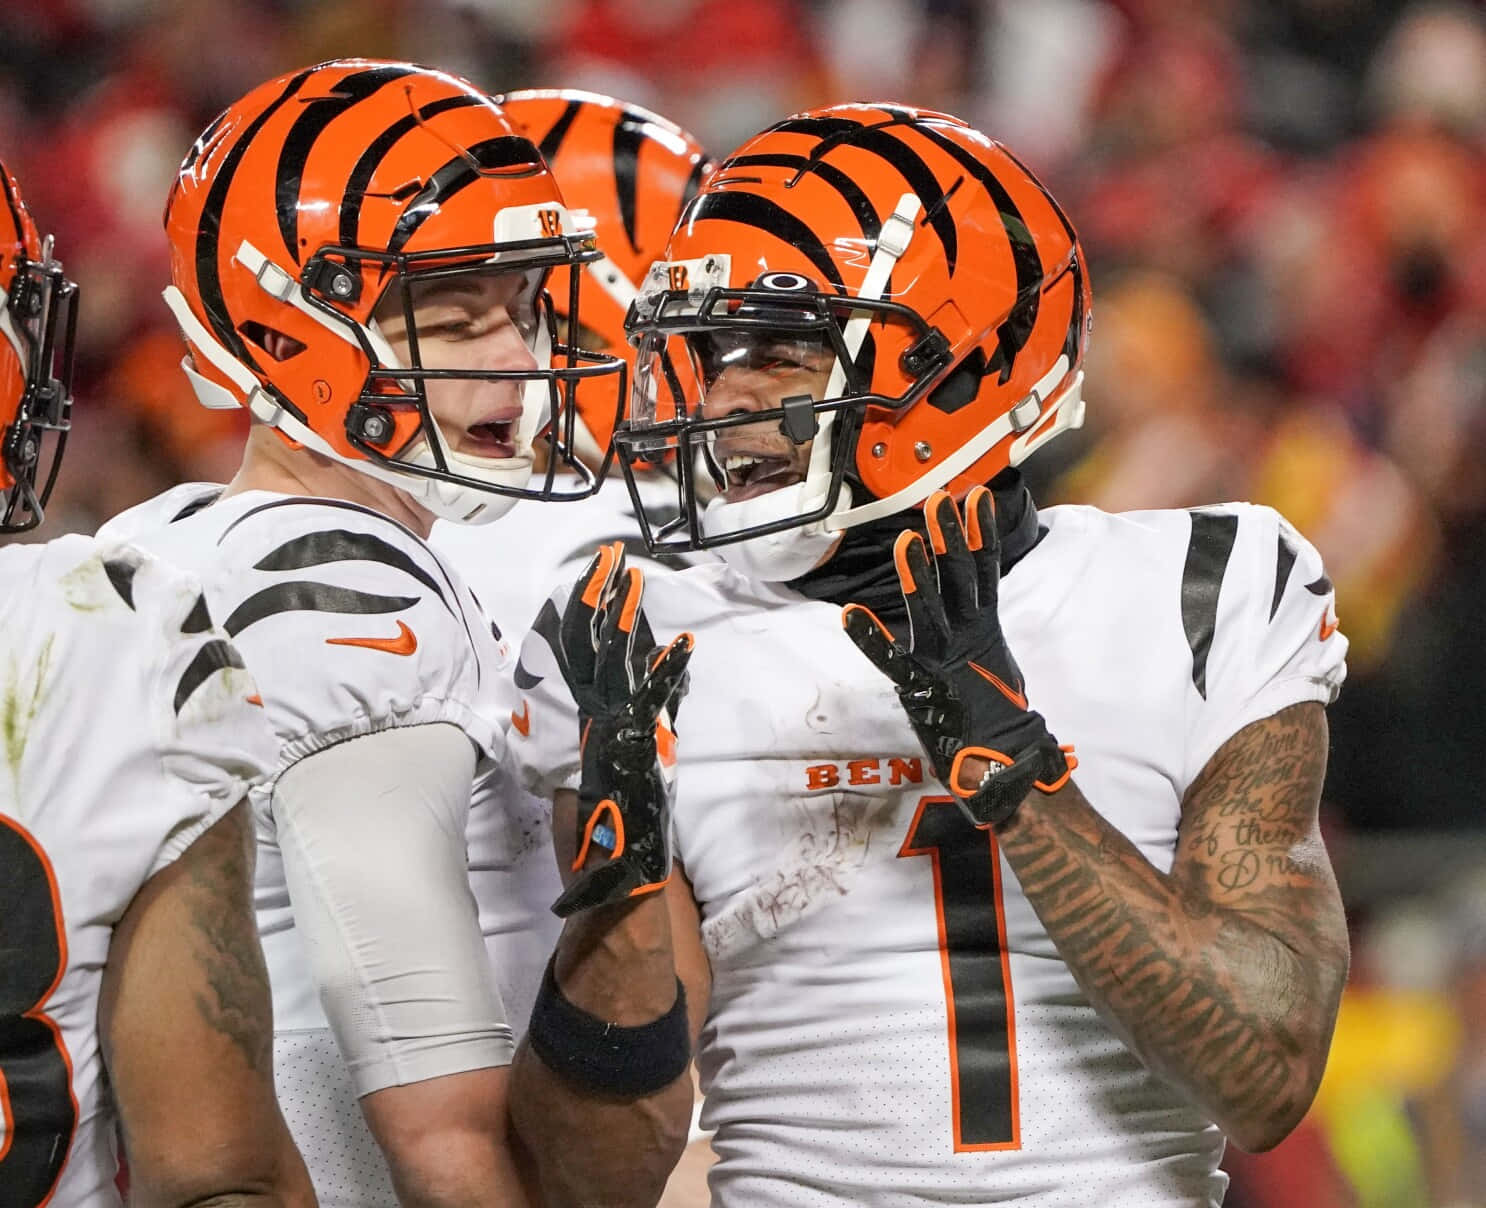 Bengals Players Celebrating On Field Wallpaper